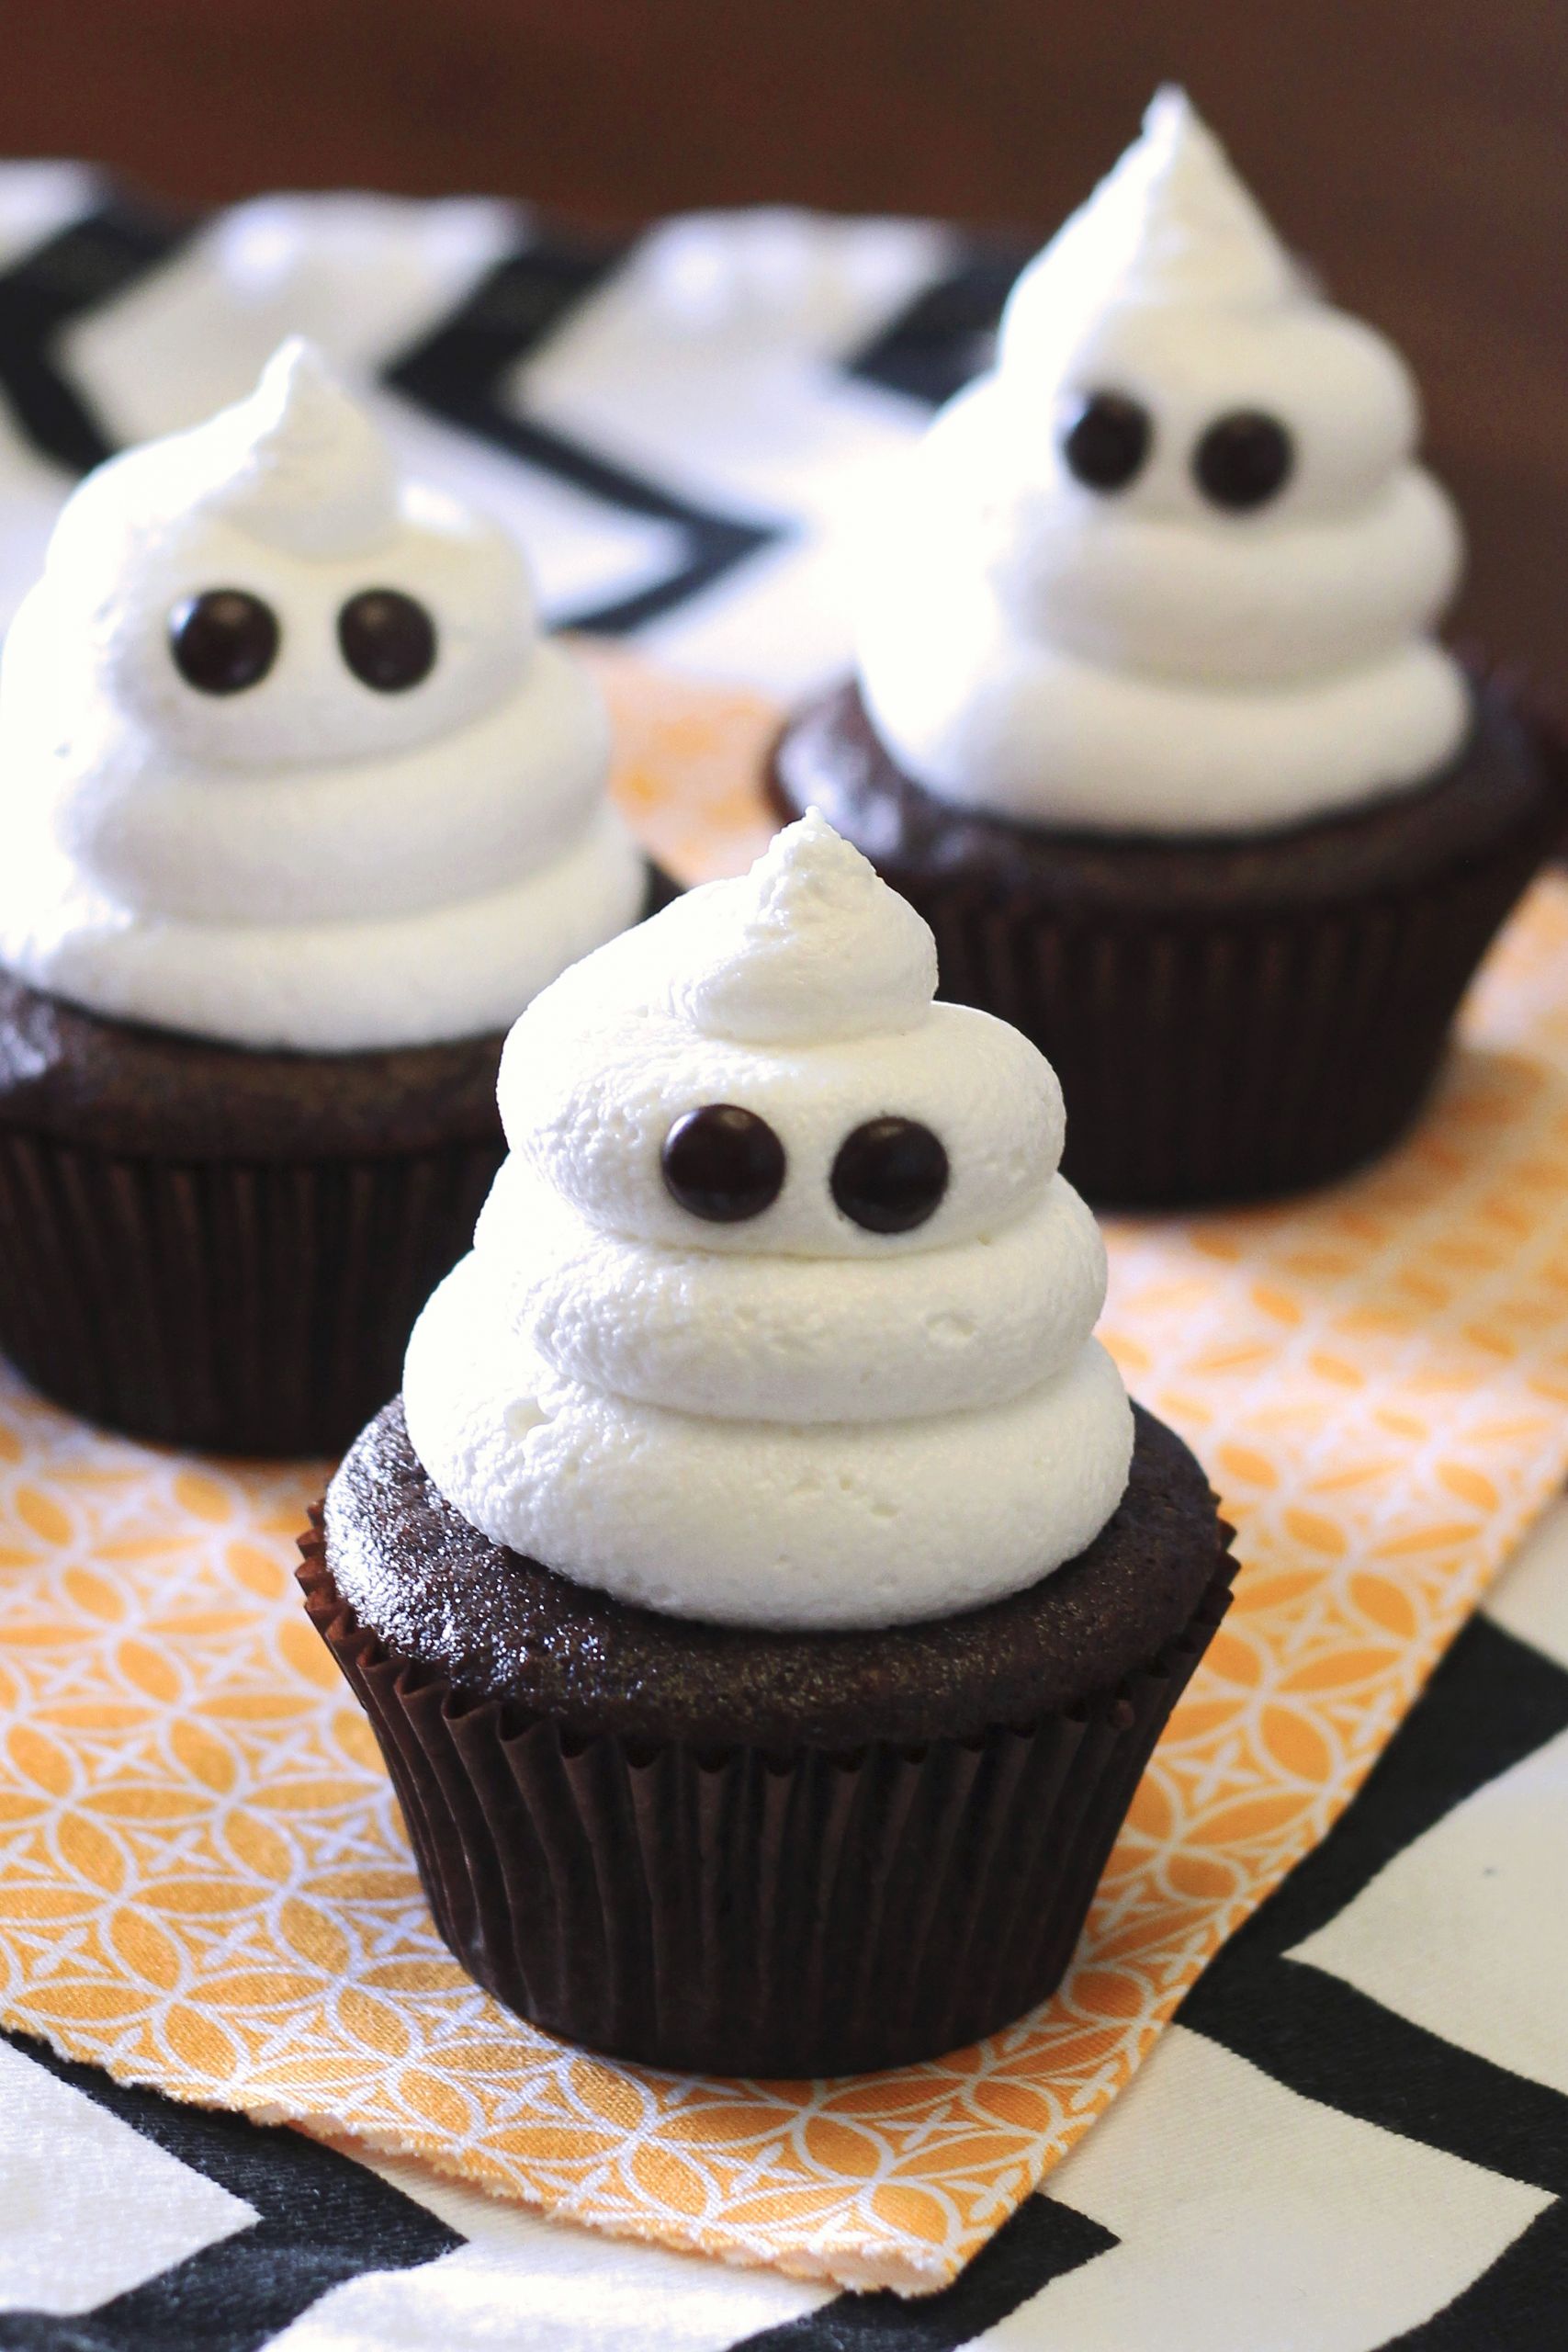 The 22 Best Ideas for Halloween Cupcakes Cake - Home, Family, Style and ...